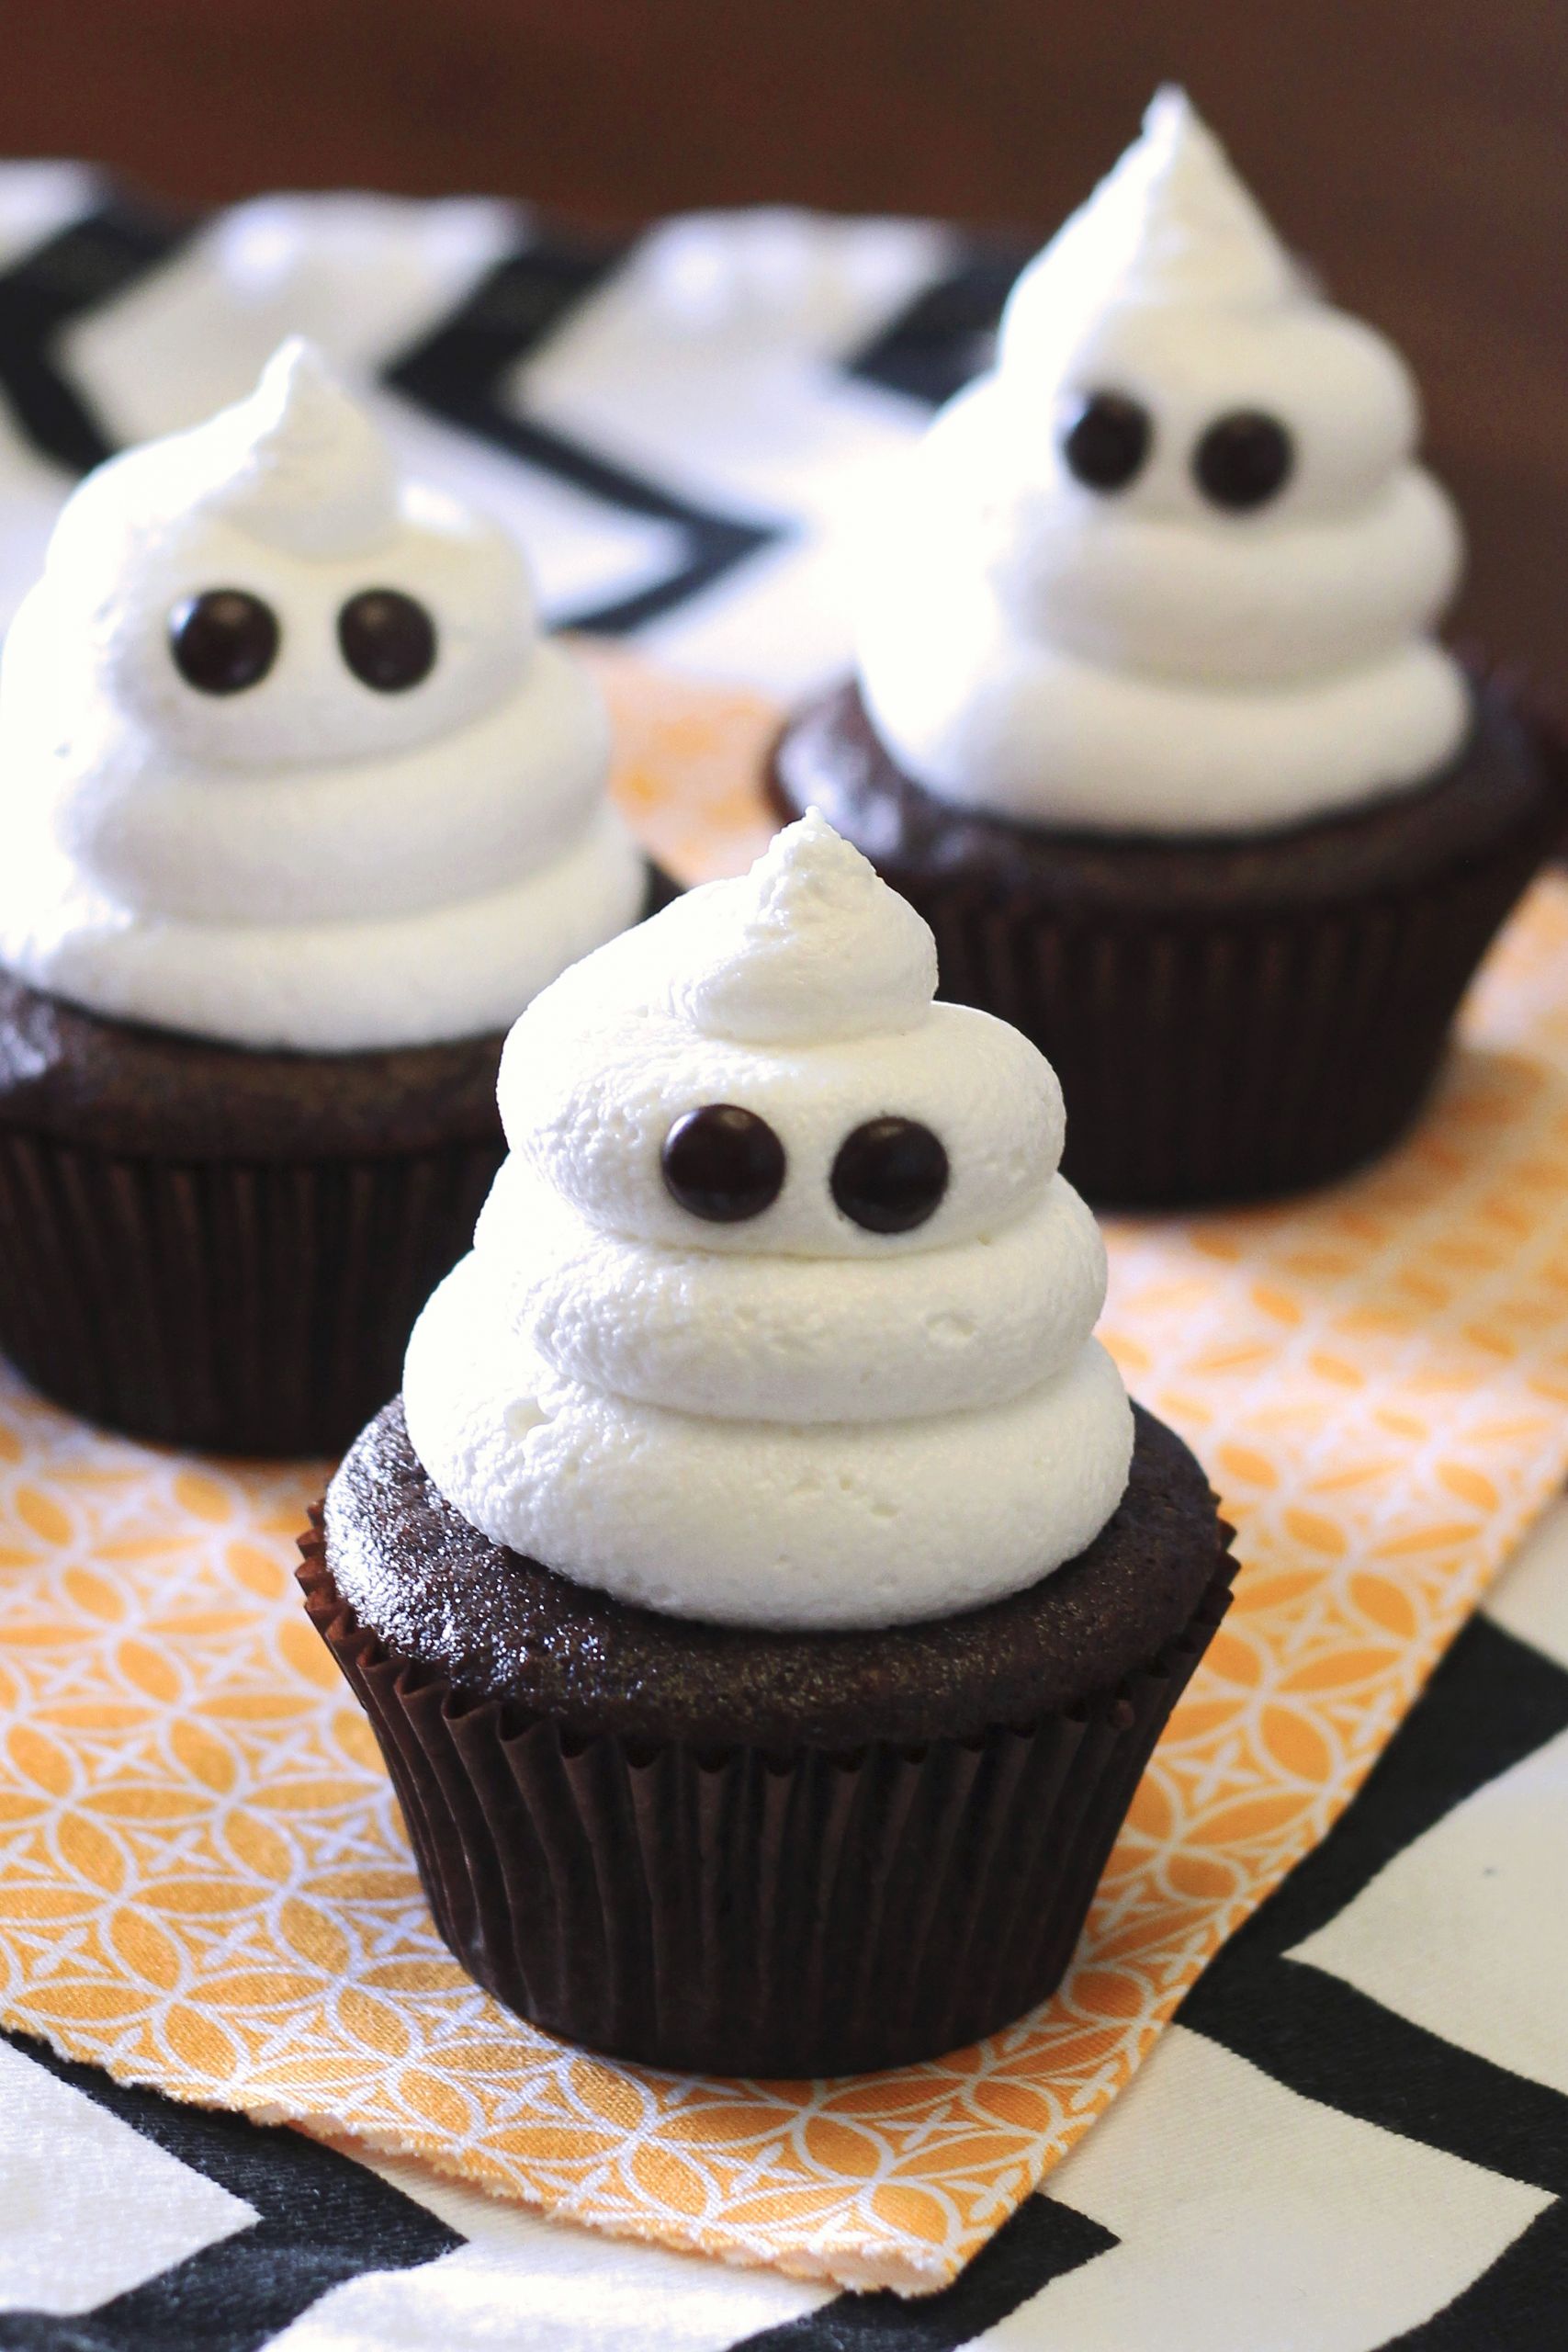 The 22 Best Ideas for Halloween Cupcakes Cake - Home, Family, Style and ...